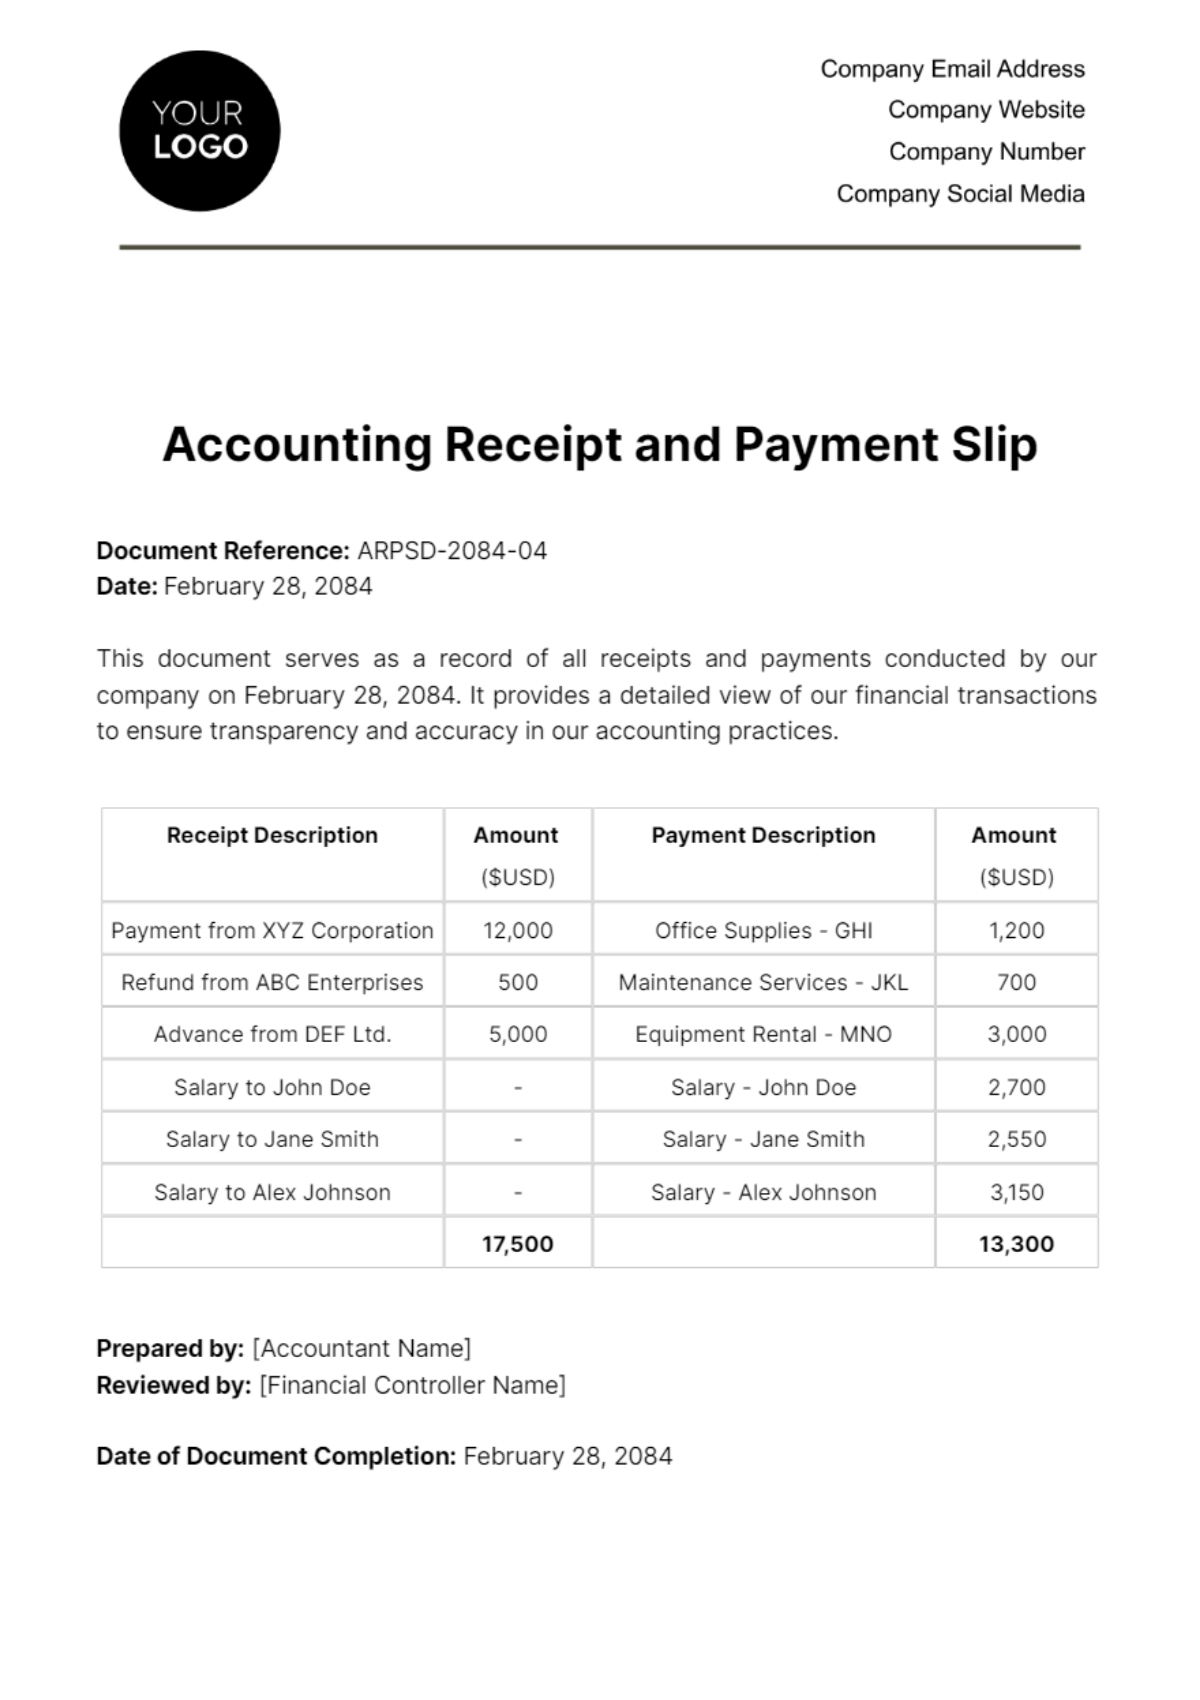 Free Accounting Receipt and Payment Slip Template